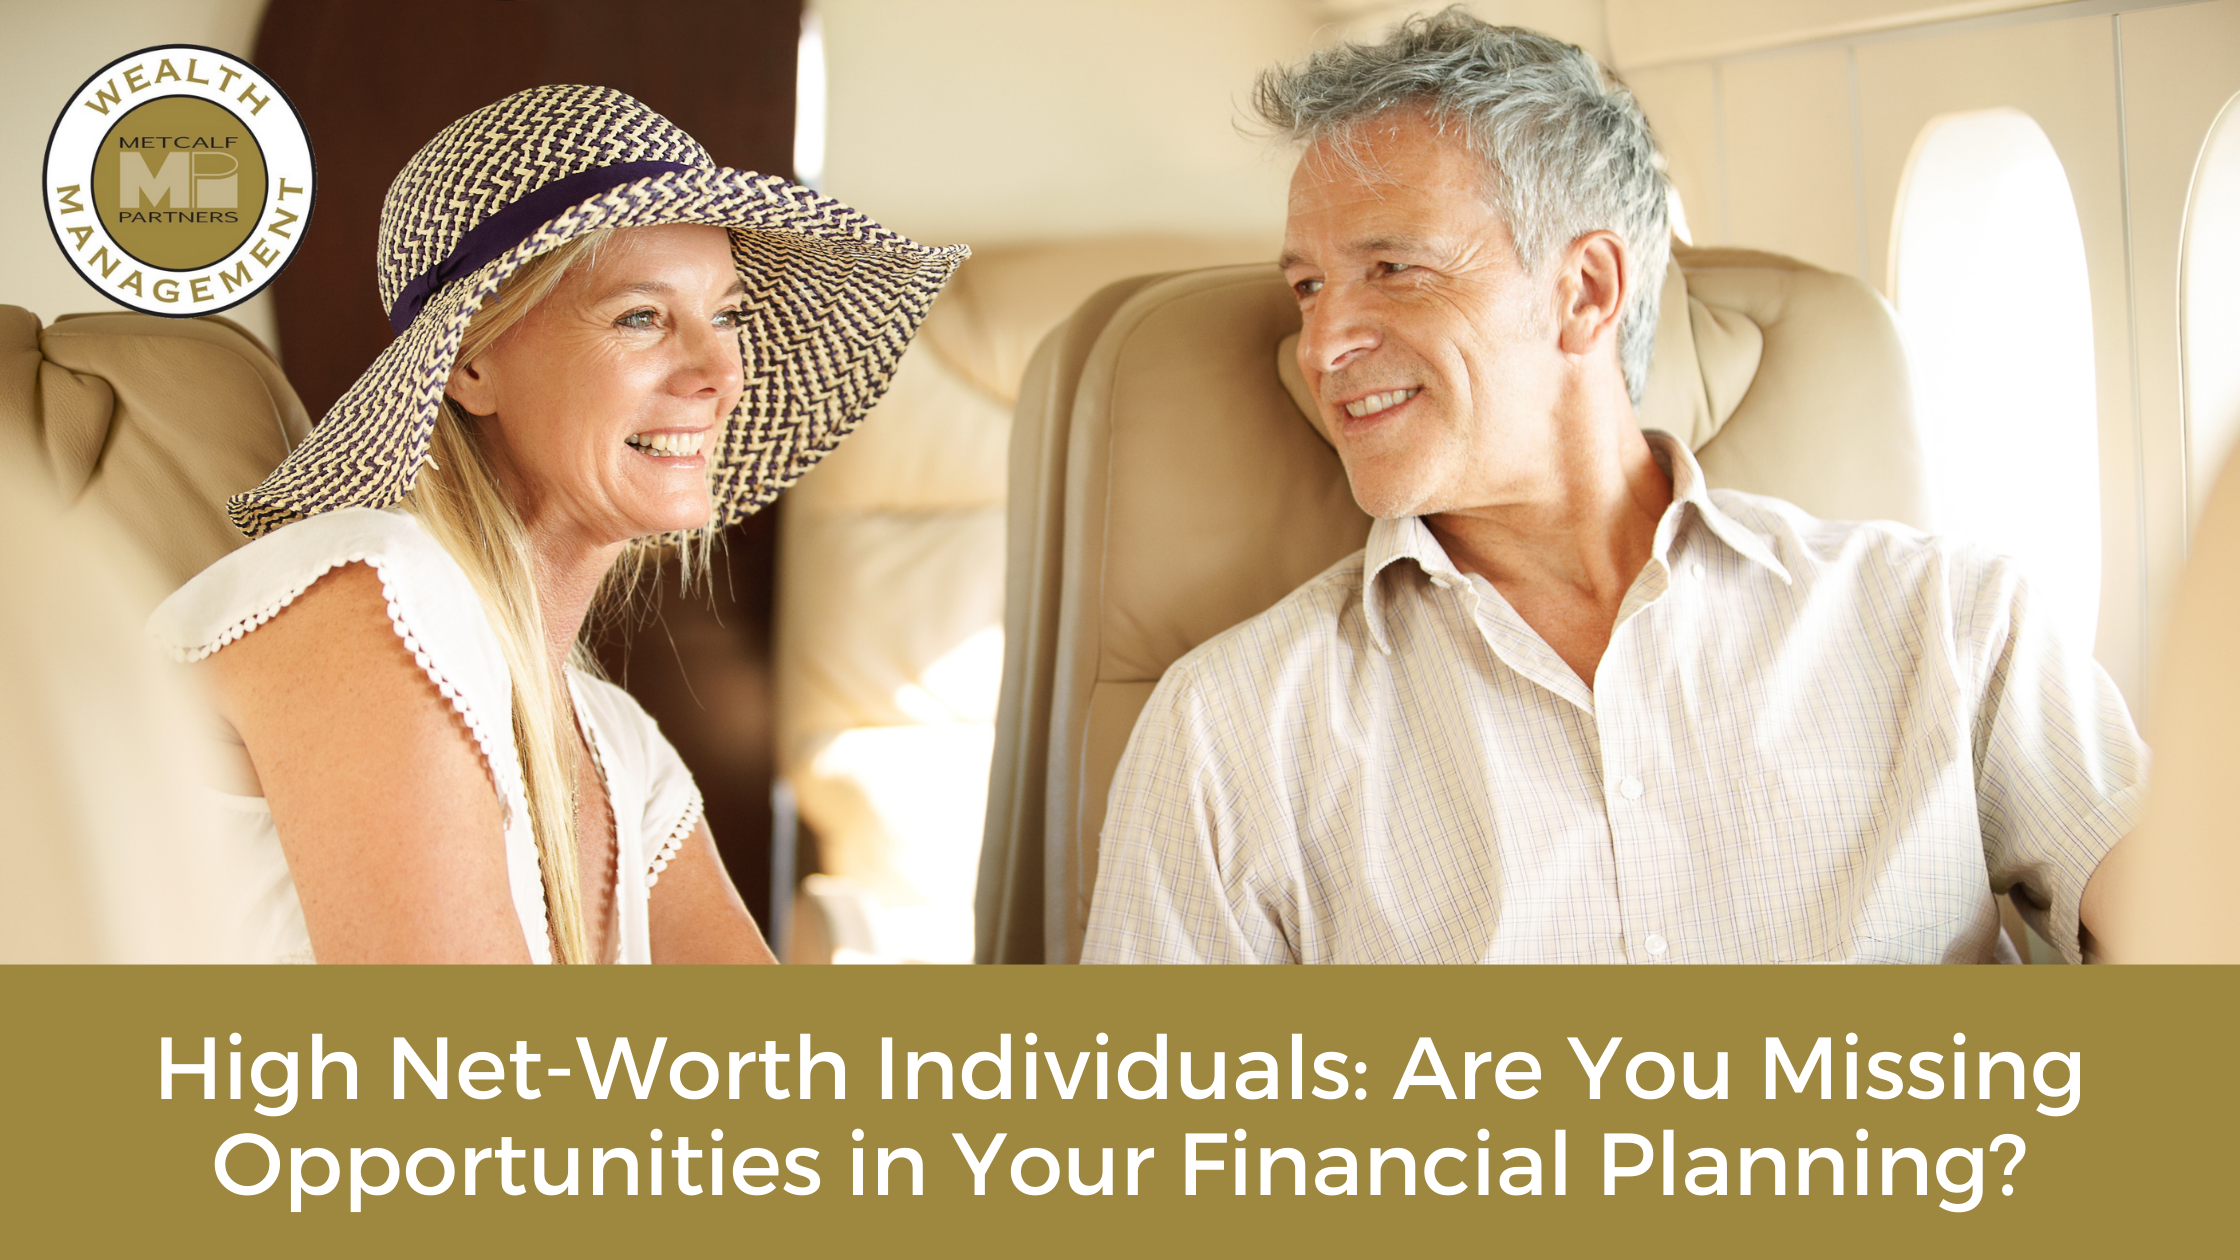 Featured image for “High Net-Worth Individuals: Are You Missing Opportunities in Your Financial Planning?”